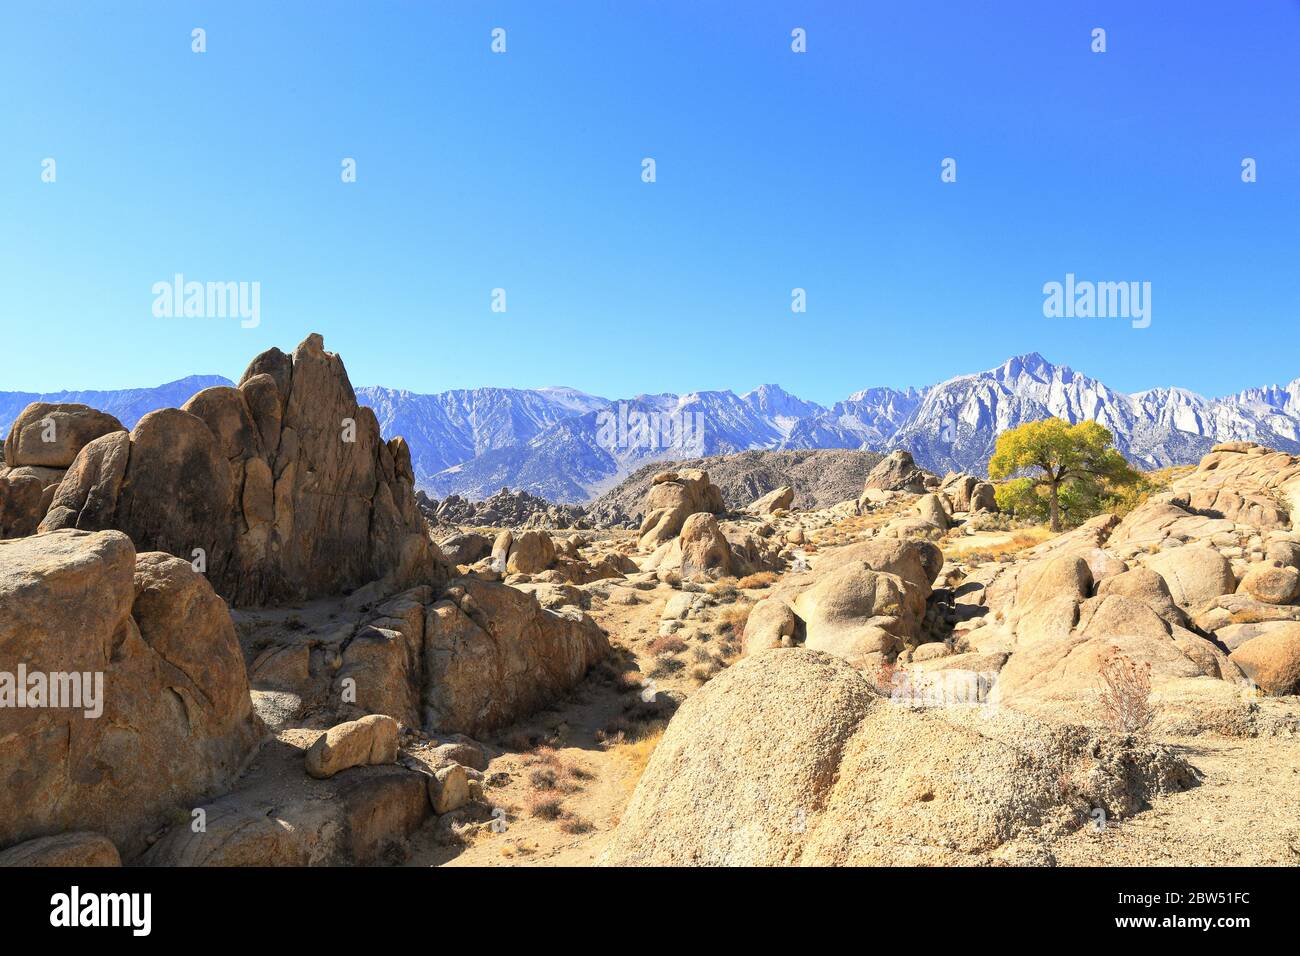 Alabama Hills with Sierra Nevada in the background in Lone Pine, California Stock Photo